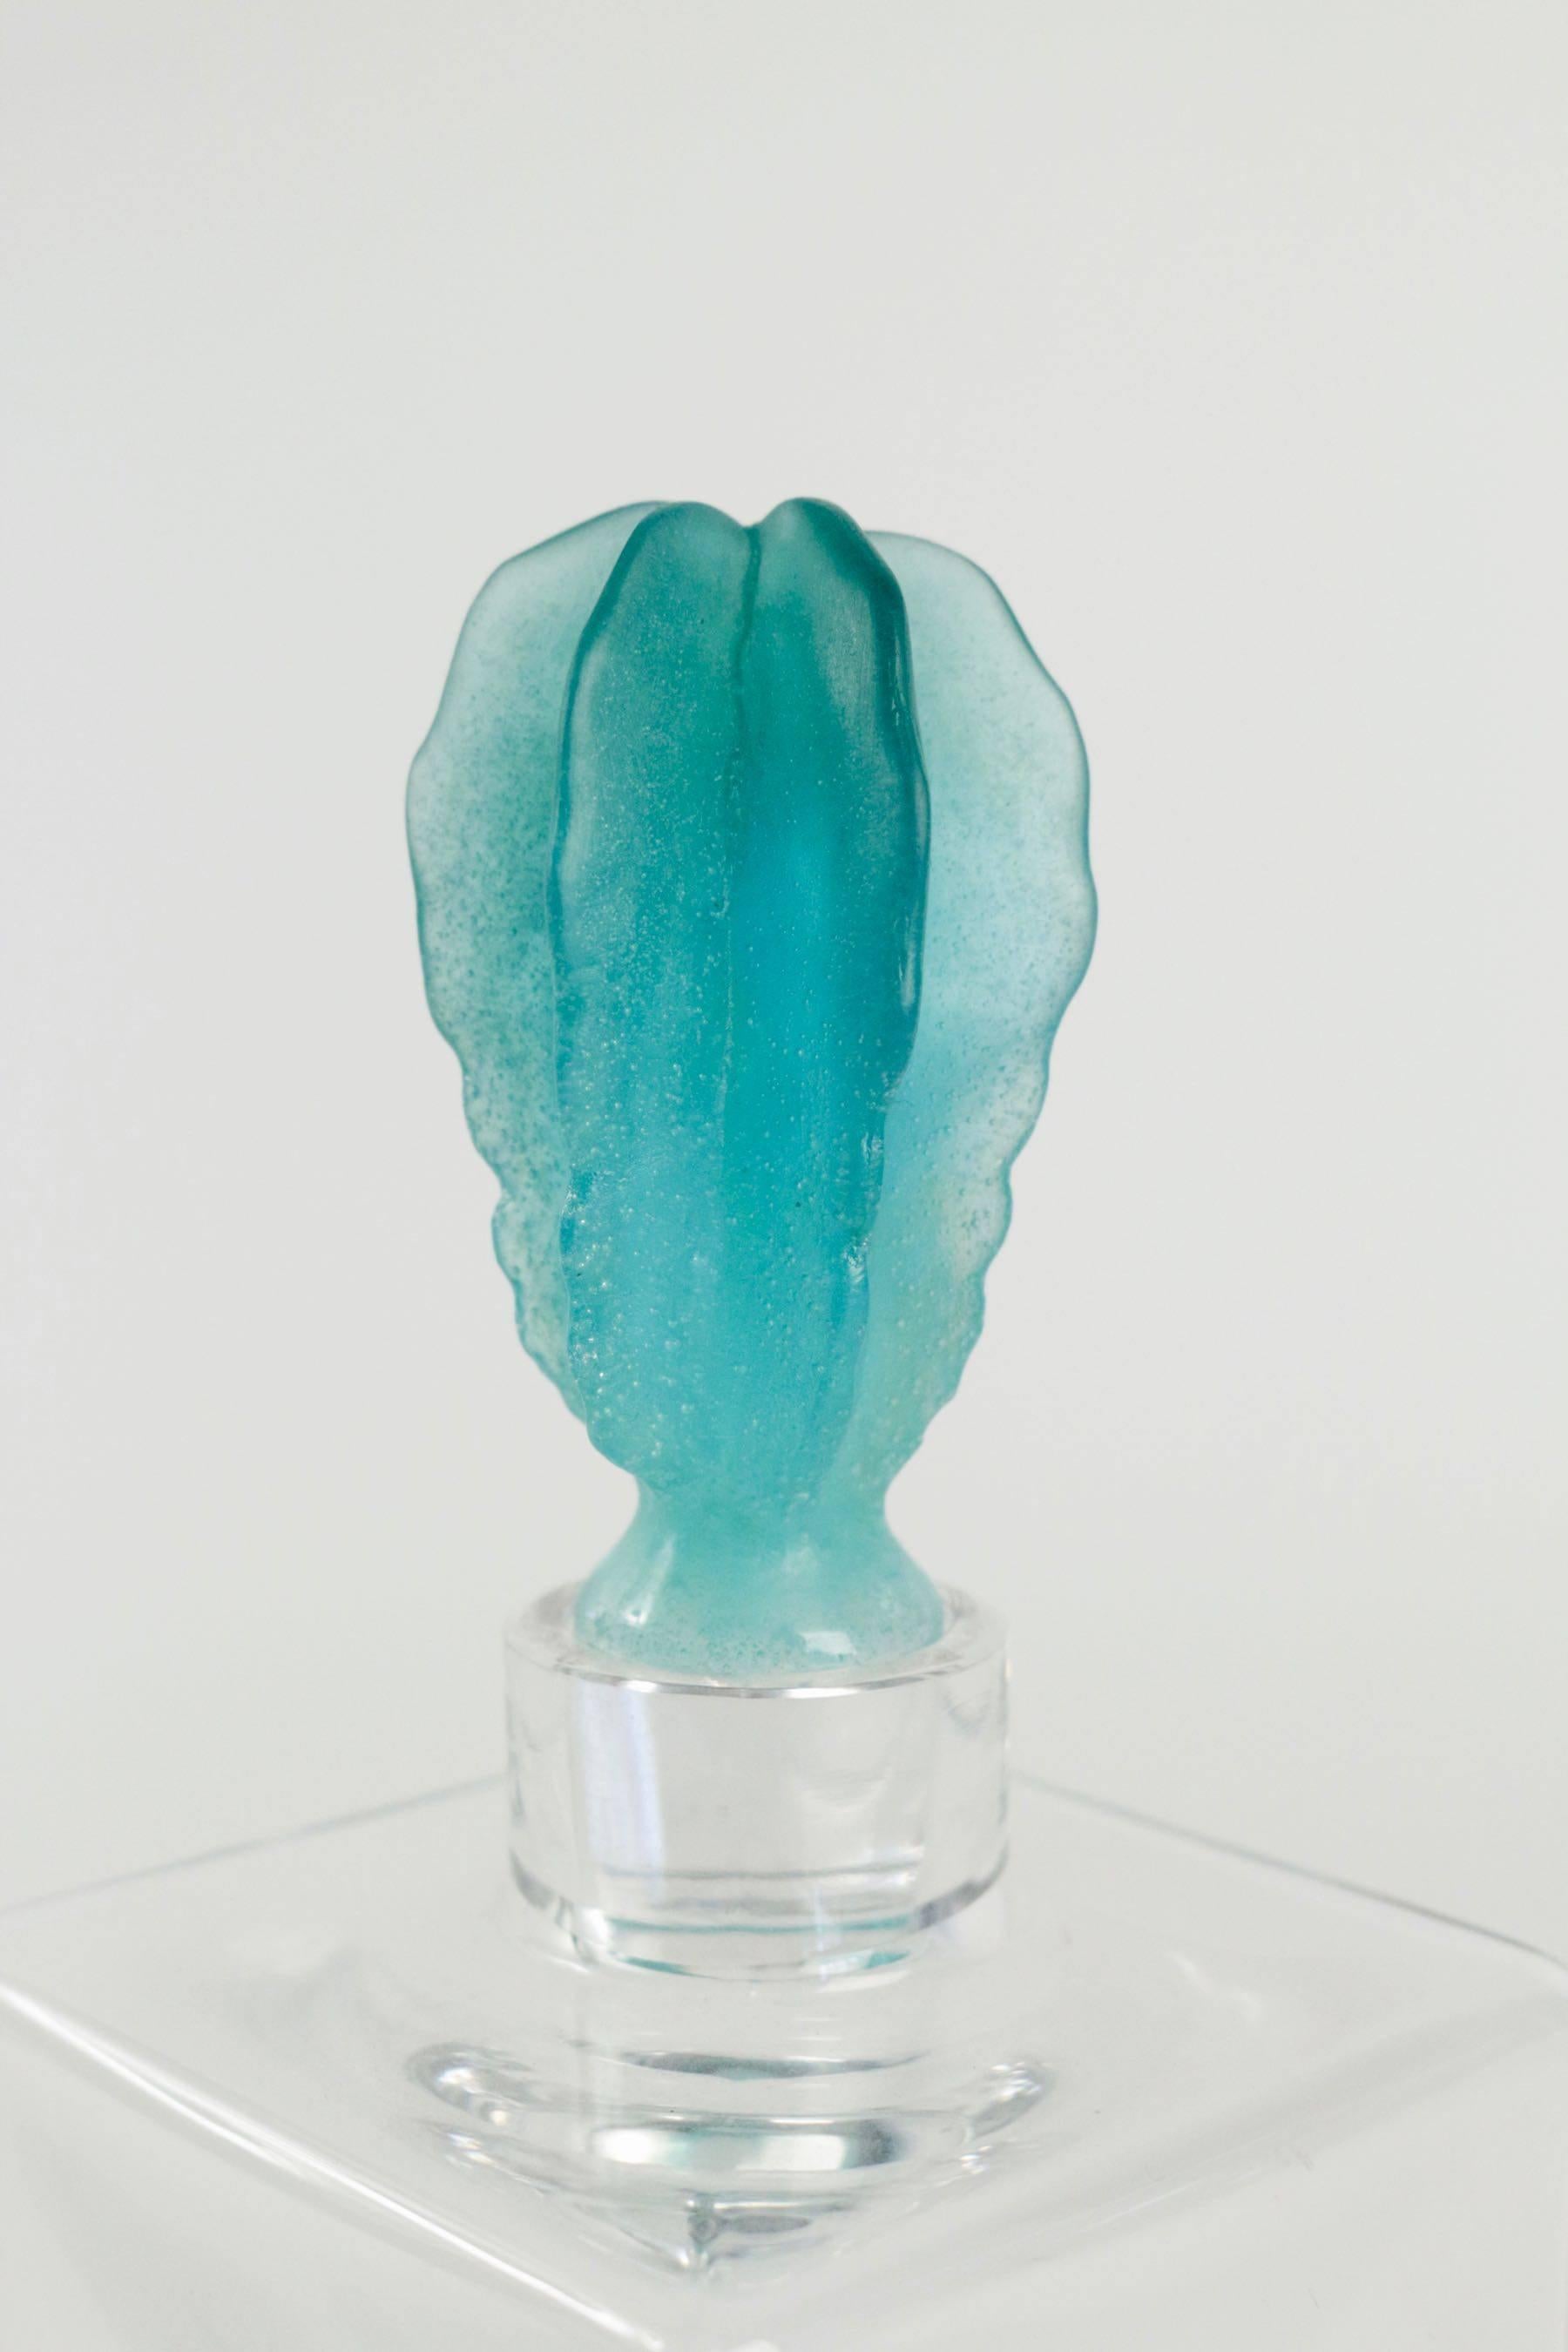 Daum crystal decanter with a pate de verre cactus shaped stopper. The designer Joseph Hilton McConnico began his collaboration with Daum France in 1987, and was the first American whose work became part of the Louvre's permanent Decorative Arts